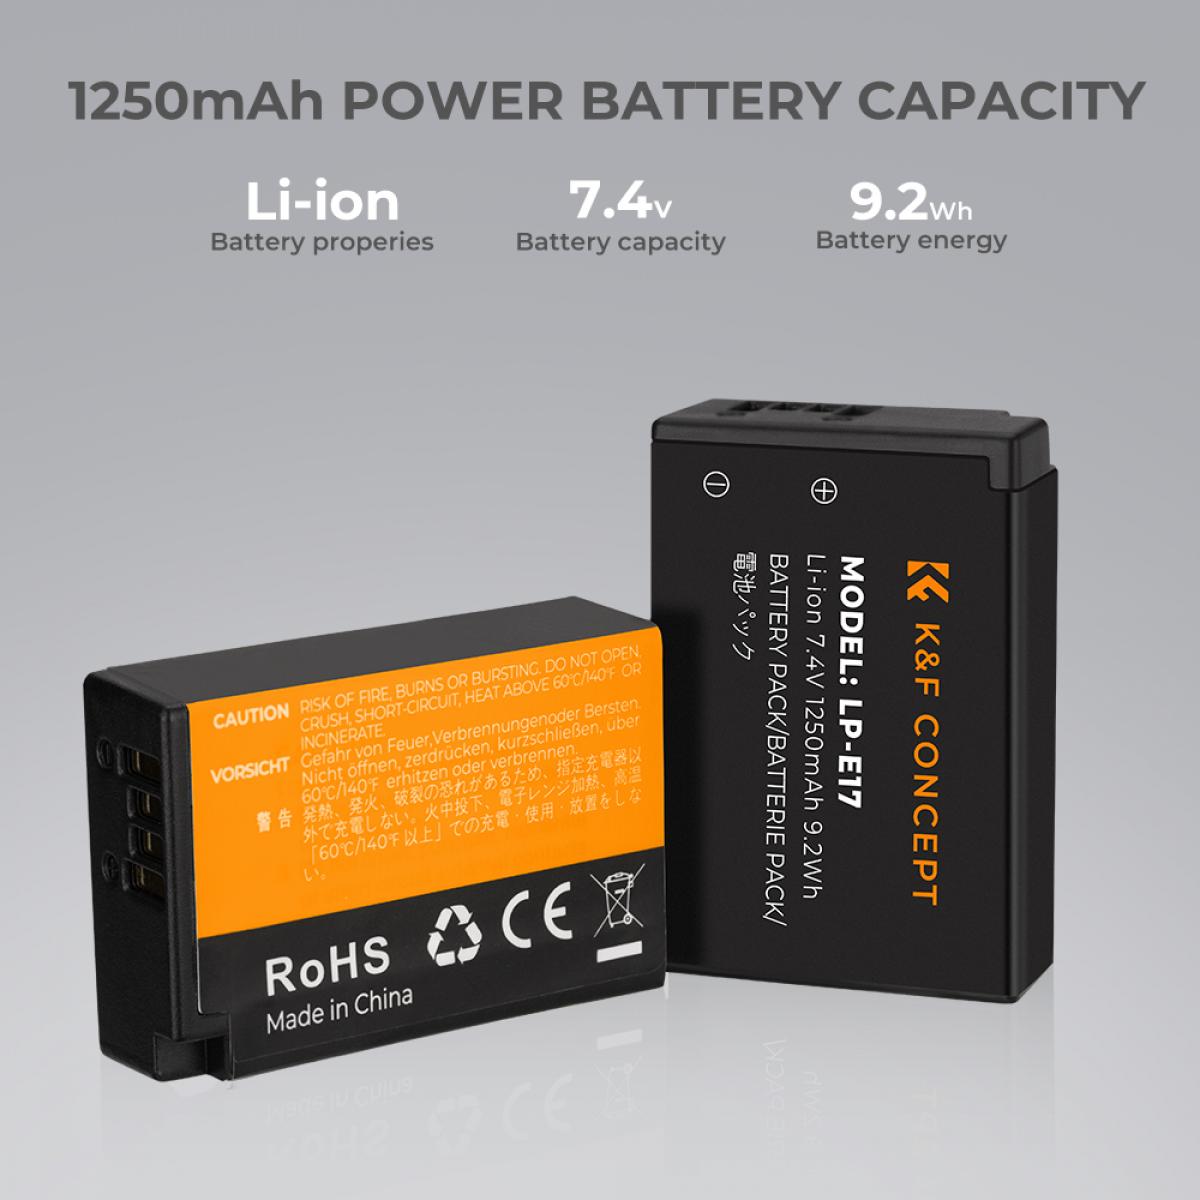 K&F Concept LP-E17 canon battery and dual battery charger kit